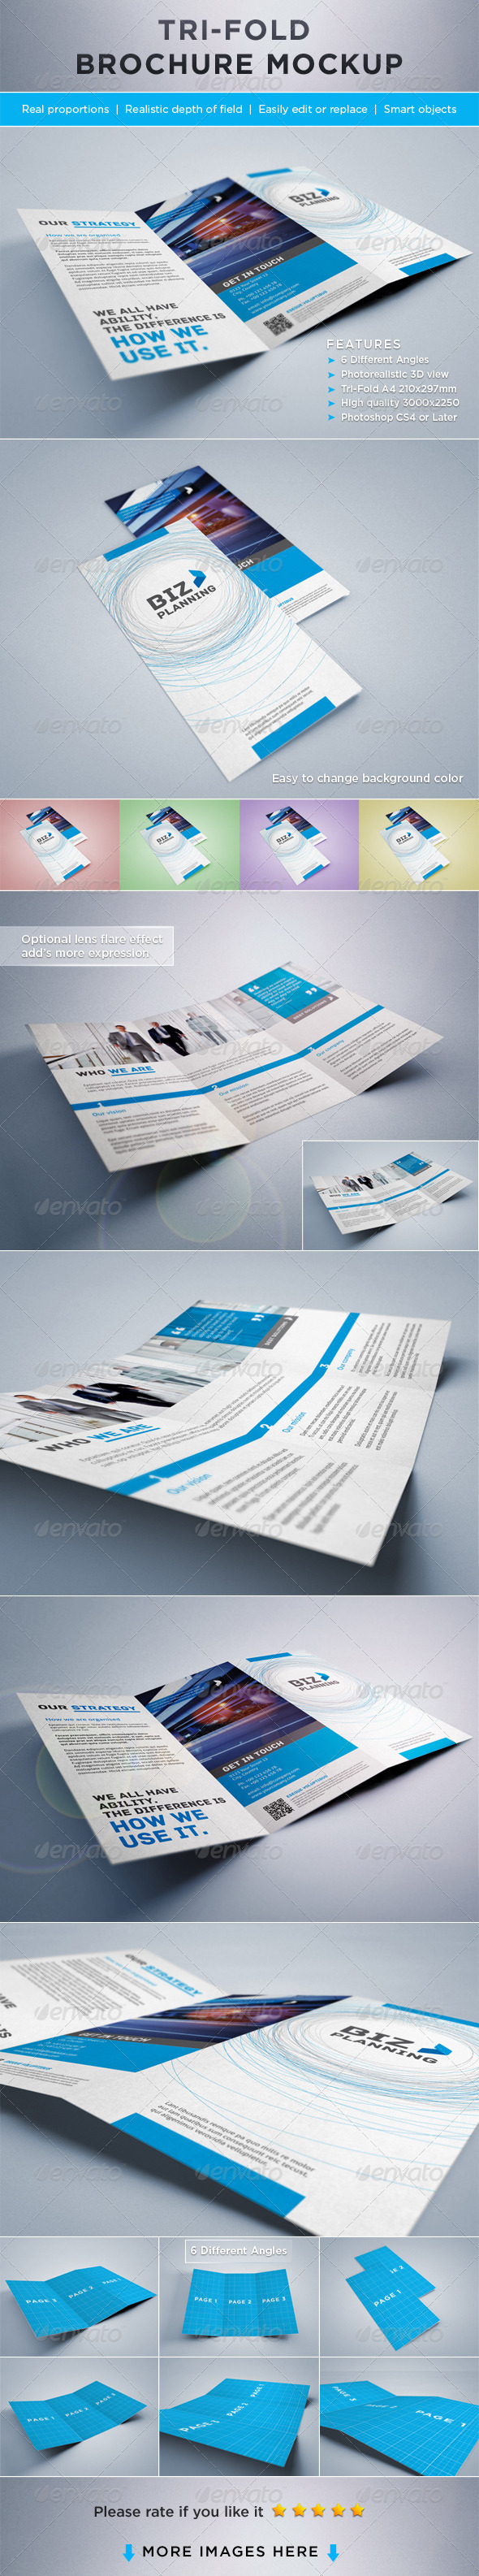 Download Tri Fold Graphics Designs Templates From Graphicriver Yellowimages Mockups